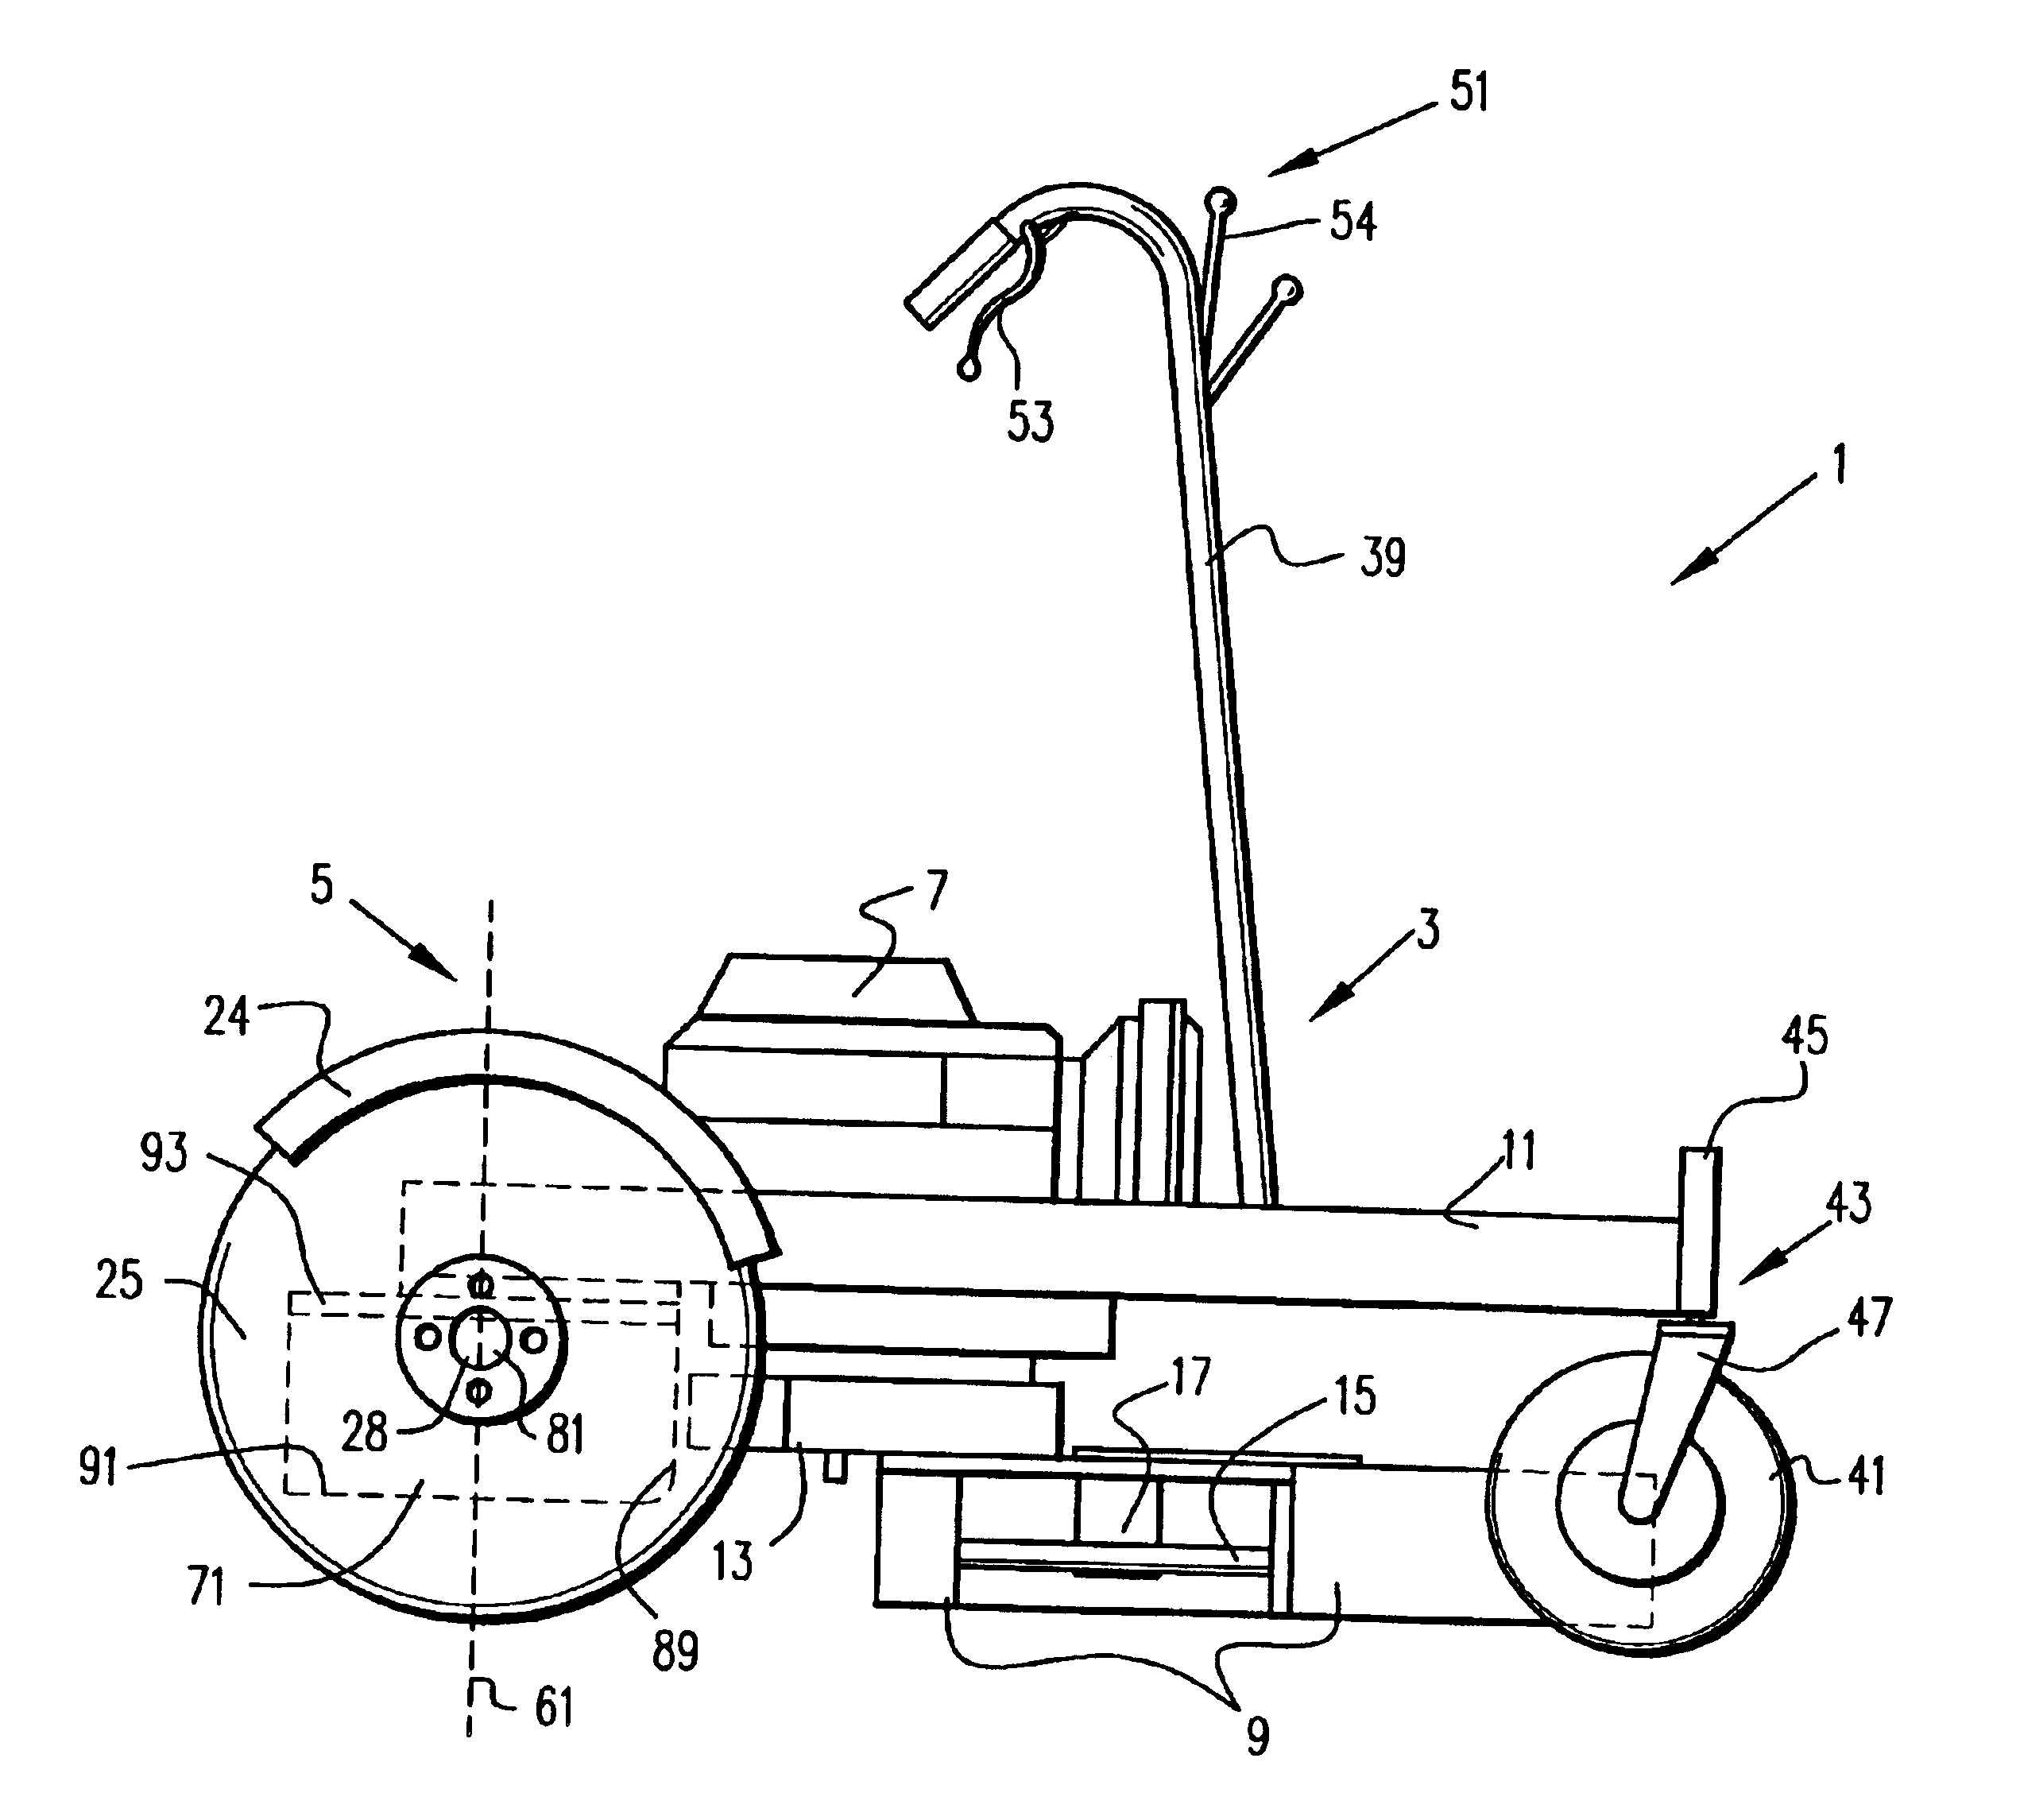 Power mower with riding platform for supporting standing-operator